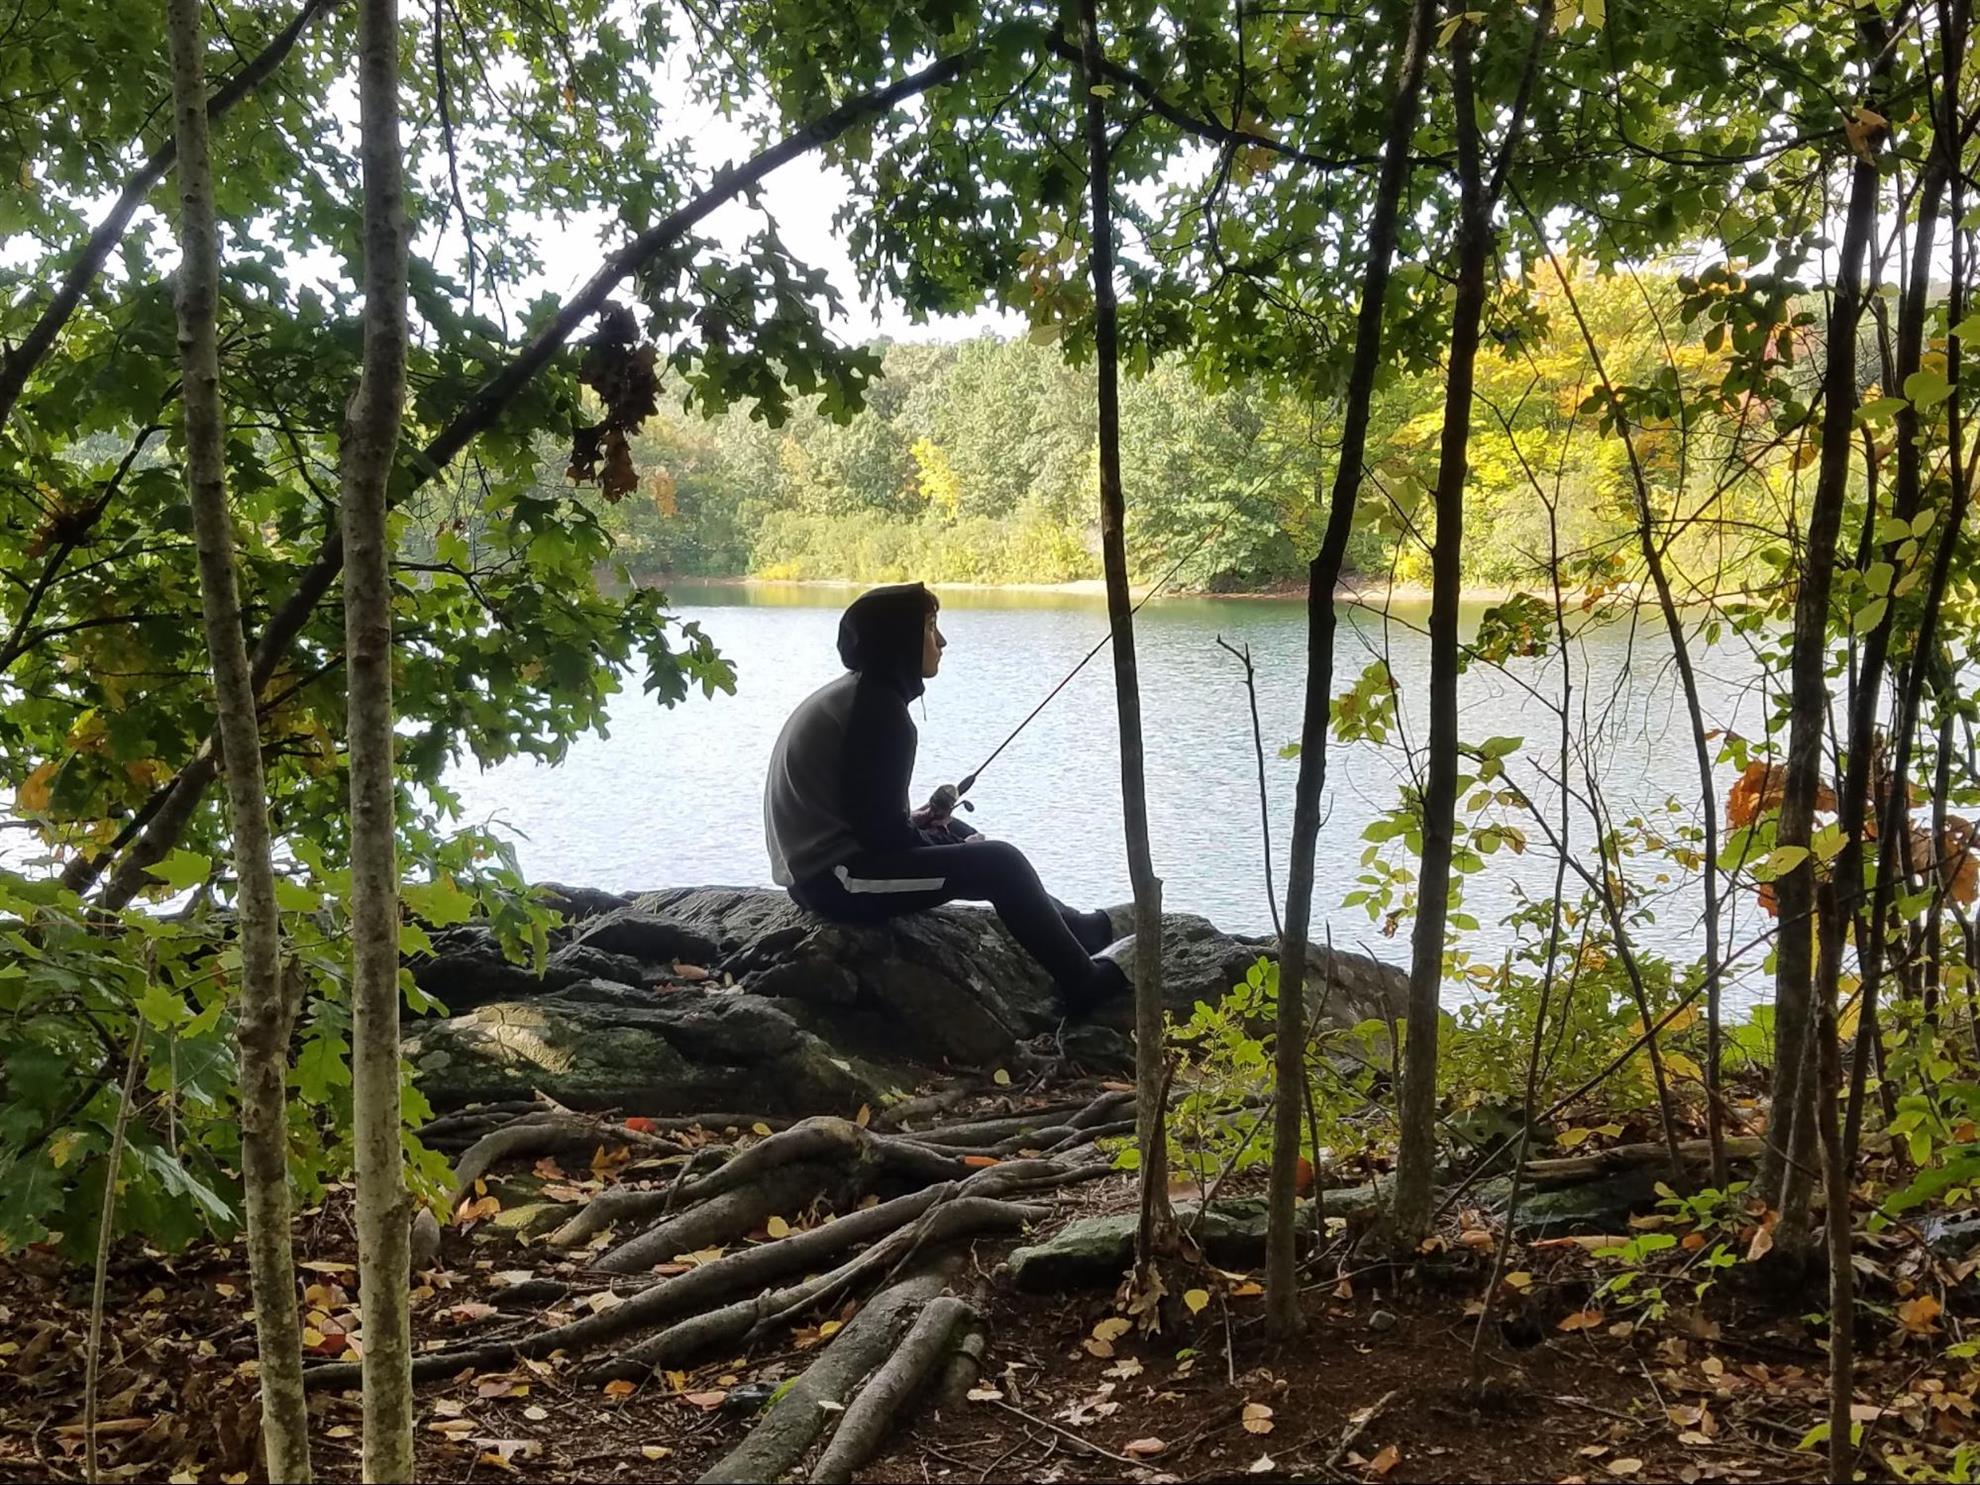 Outline of student through the trees, fishing into a pond